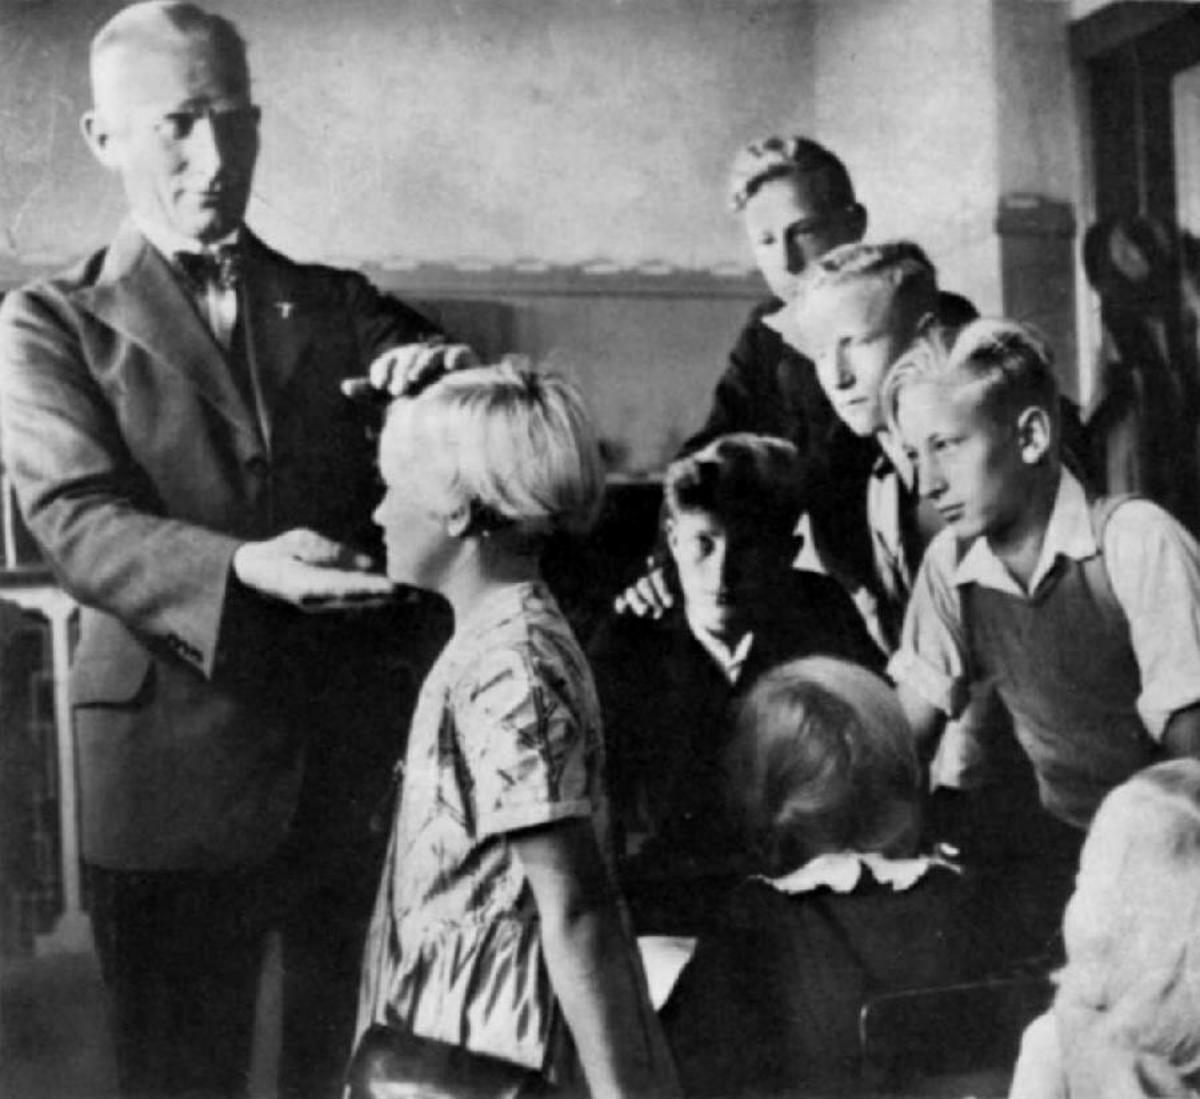 The Lebensborn project was one of the most secret and terrifying Nazi projects. Heinrich Himmler founded the Lebensborn project on December 12, 1935. 